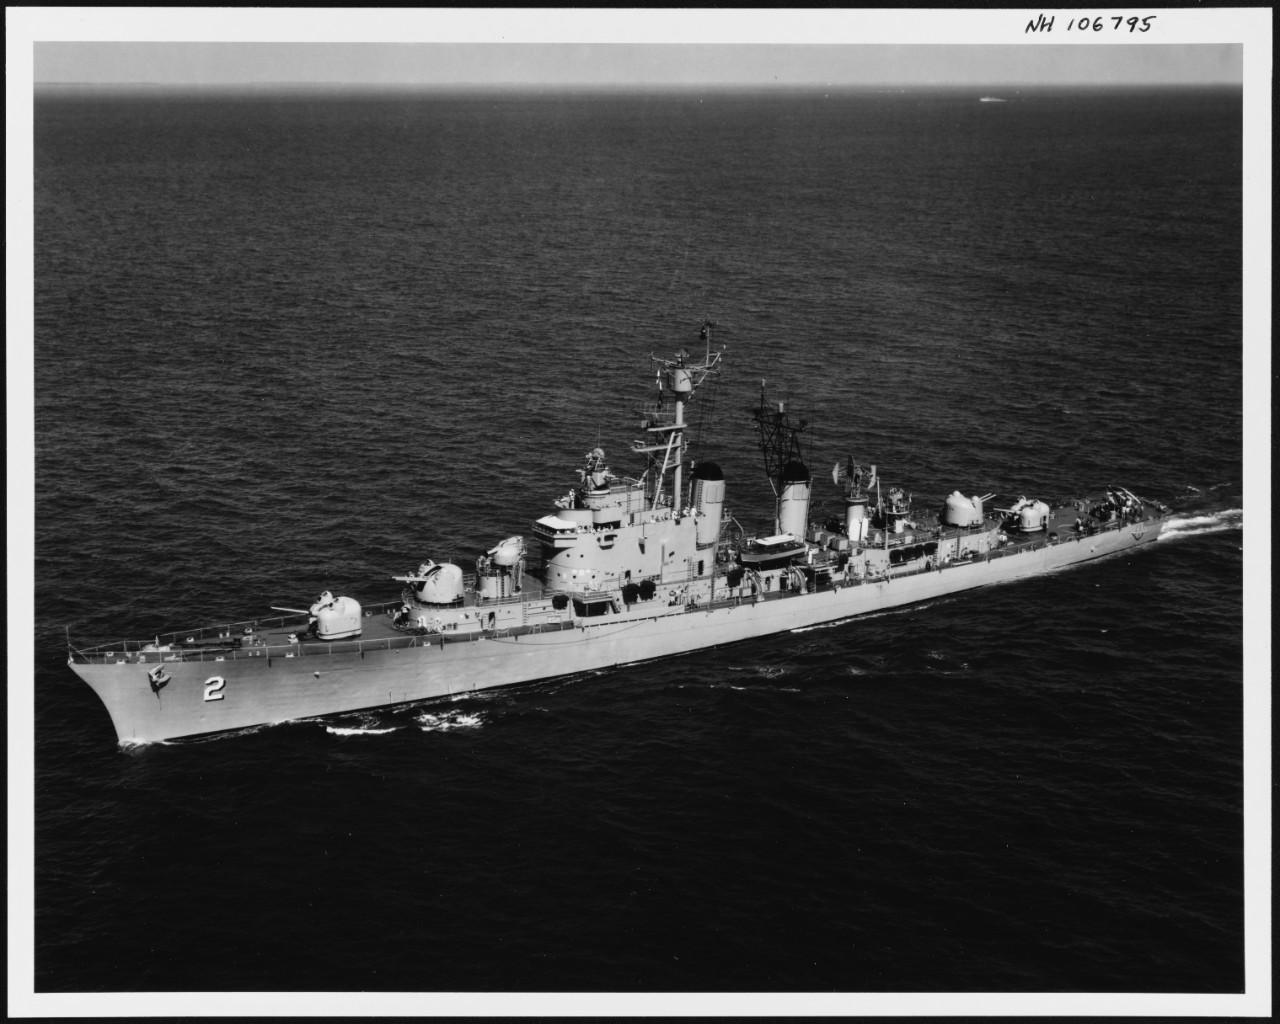 Photo #: NH 106795  USS Mitscher For a MEDIUM RESOLUTION IMAGE, click the thumbnail.